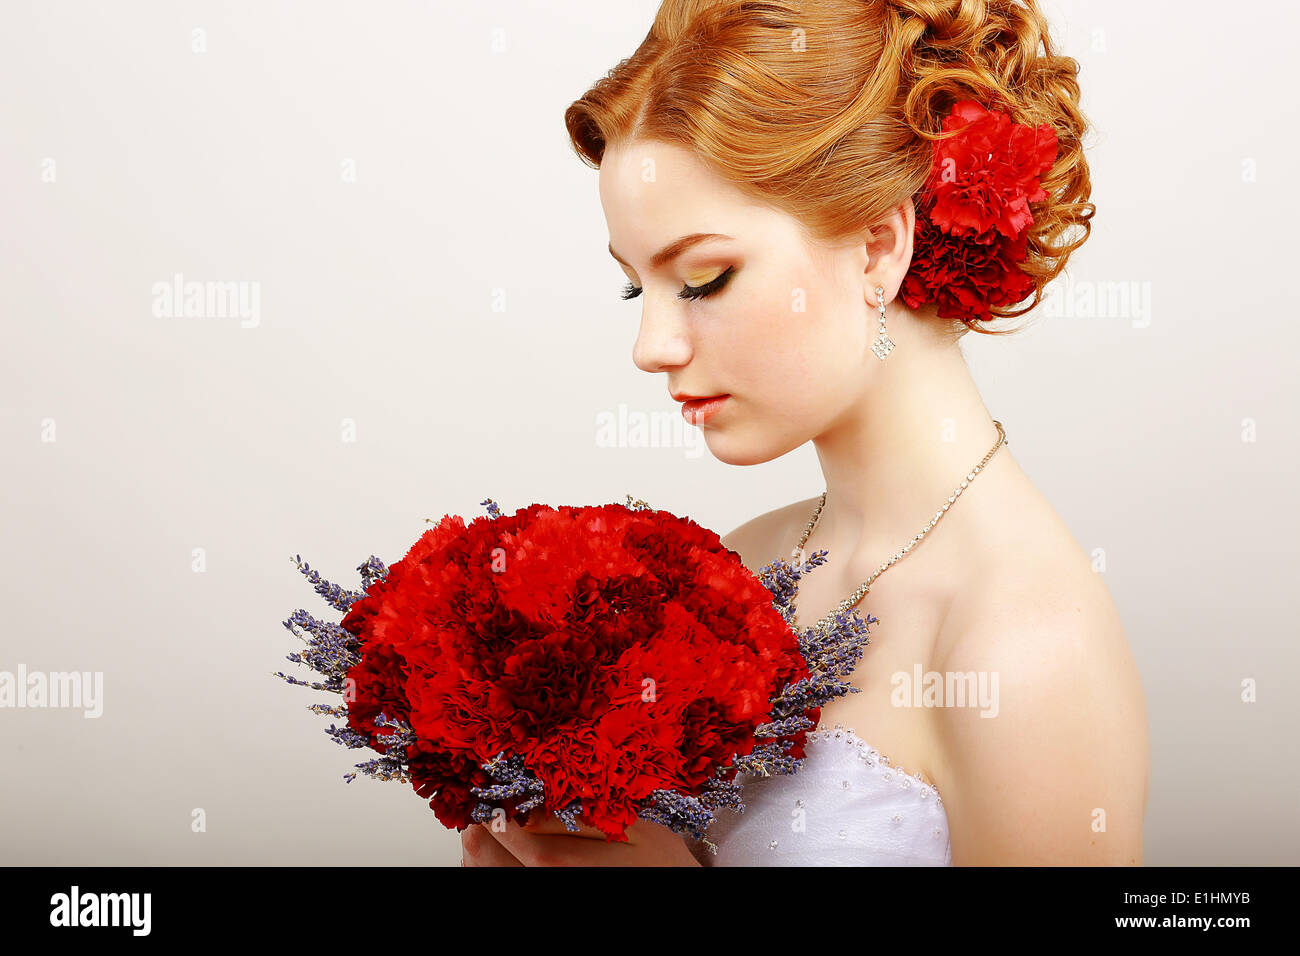 Mildness. Profile of Calm Woman with Red Bouquet of Flowers. Tranquility & Gentleness Stock Photo